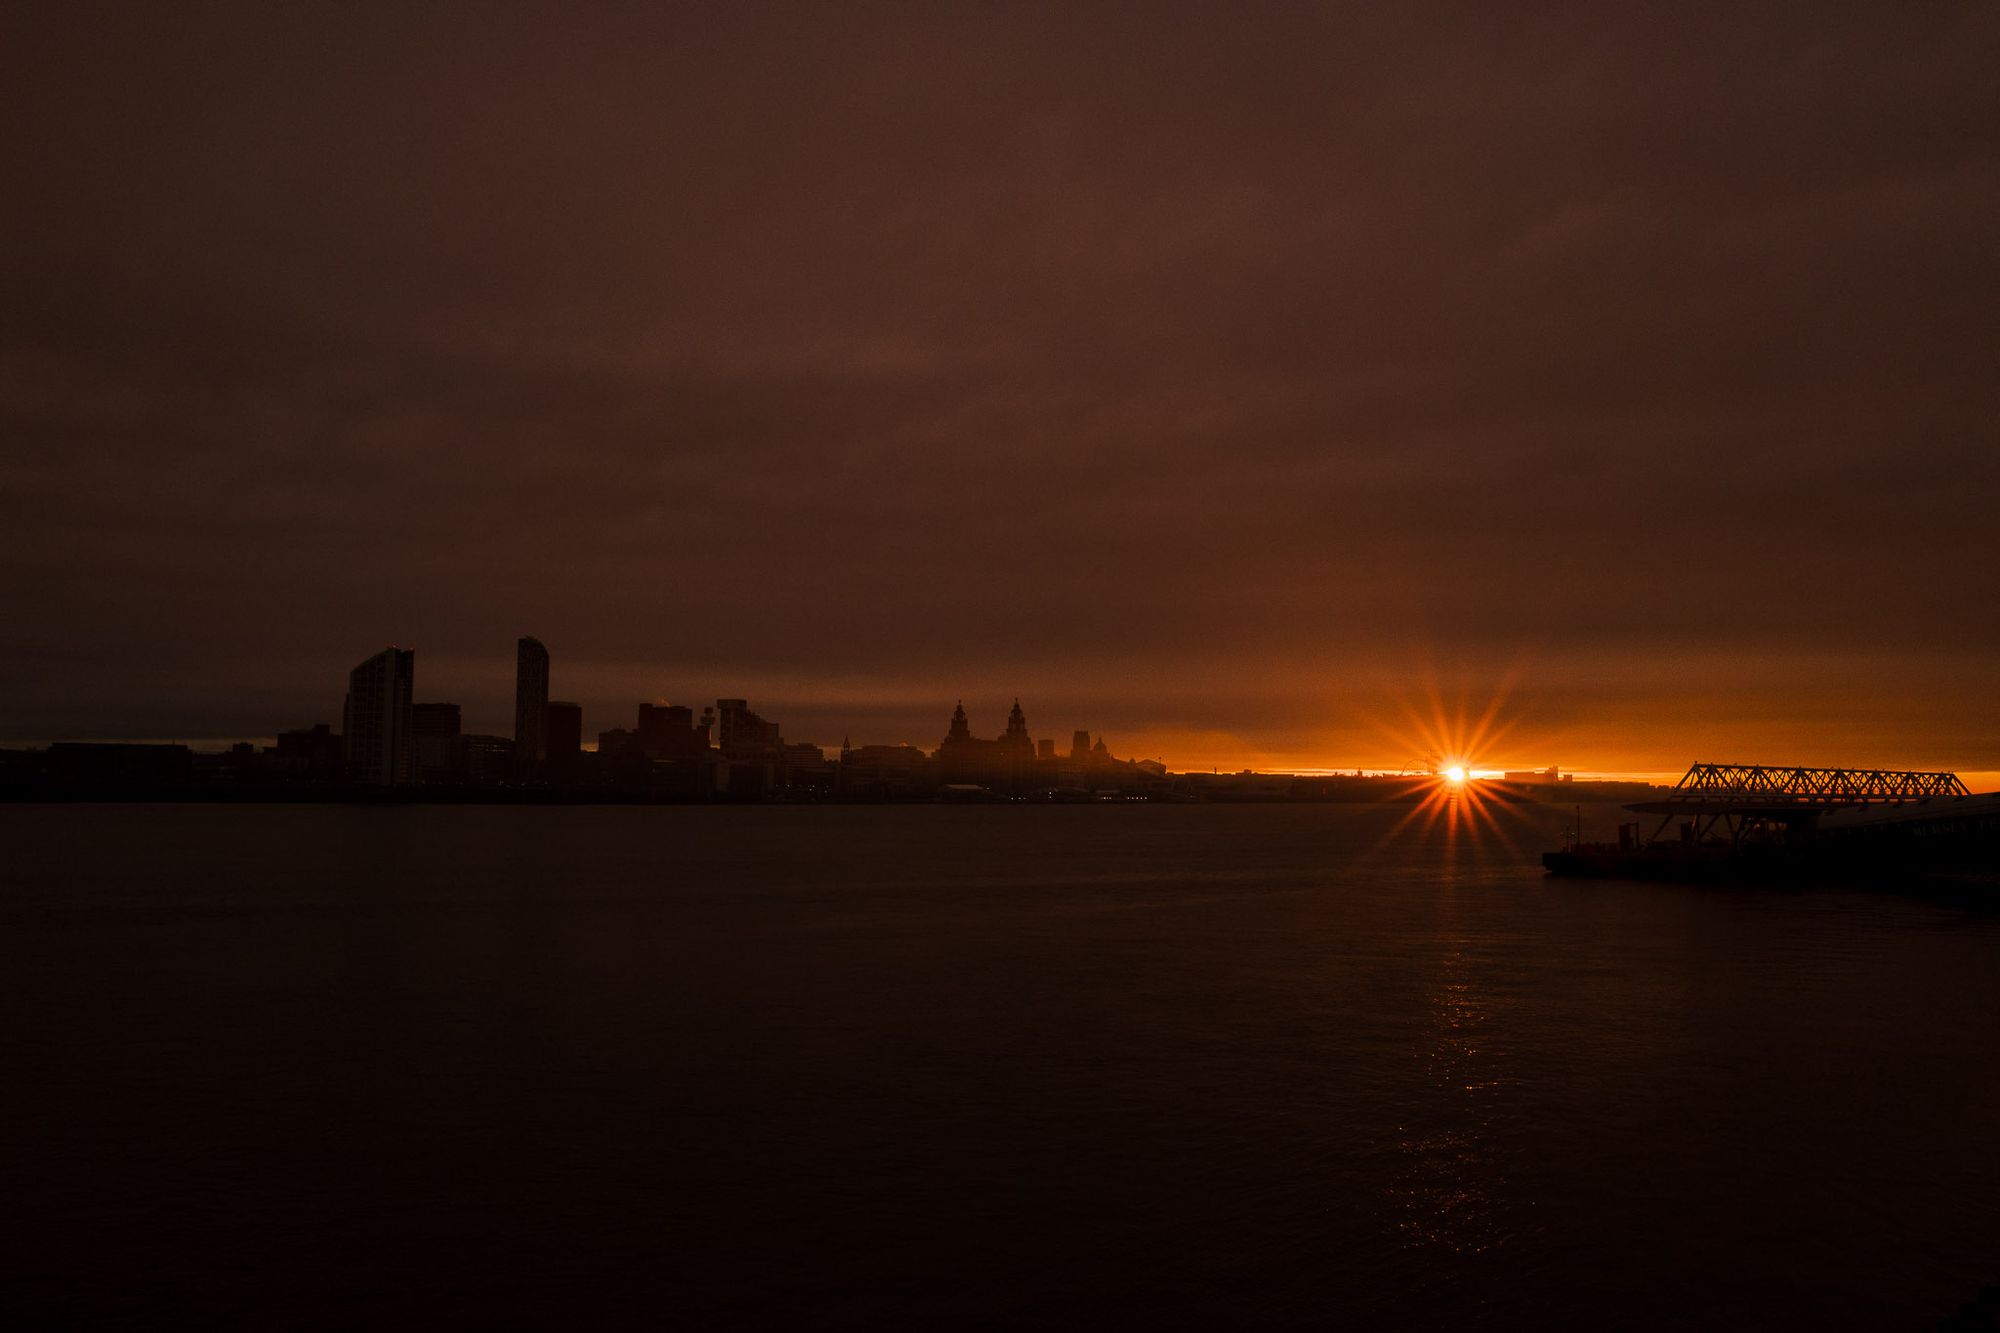 Sunrise over the city of Liverpool taken from across the River Mersey.